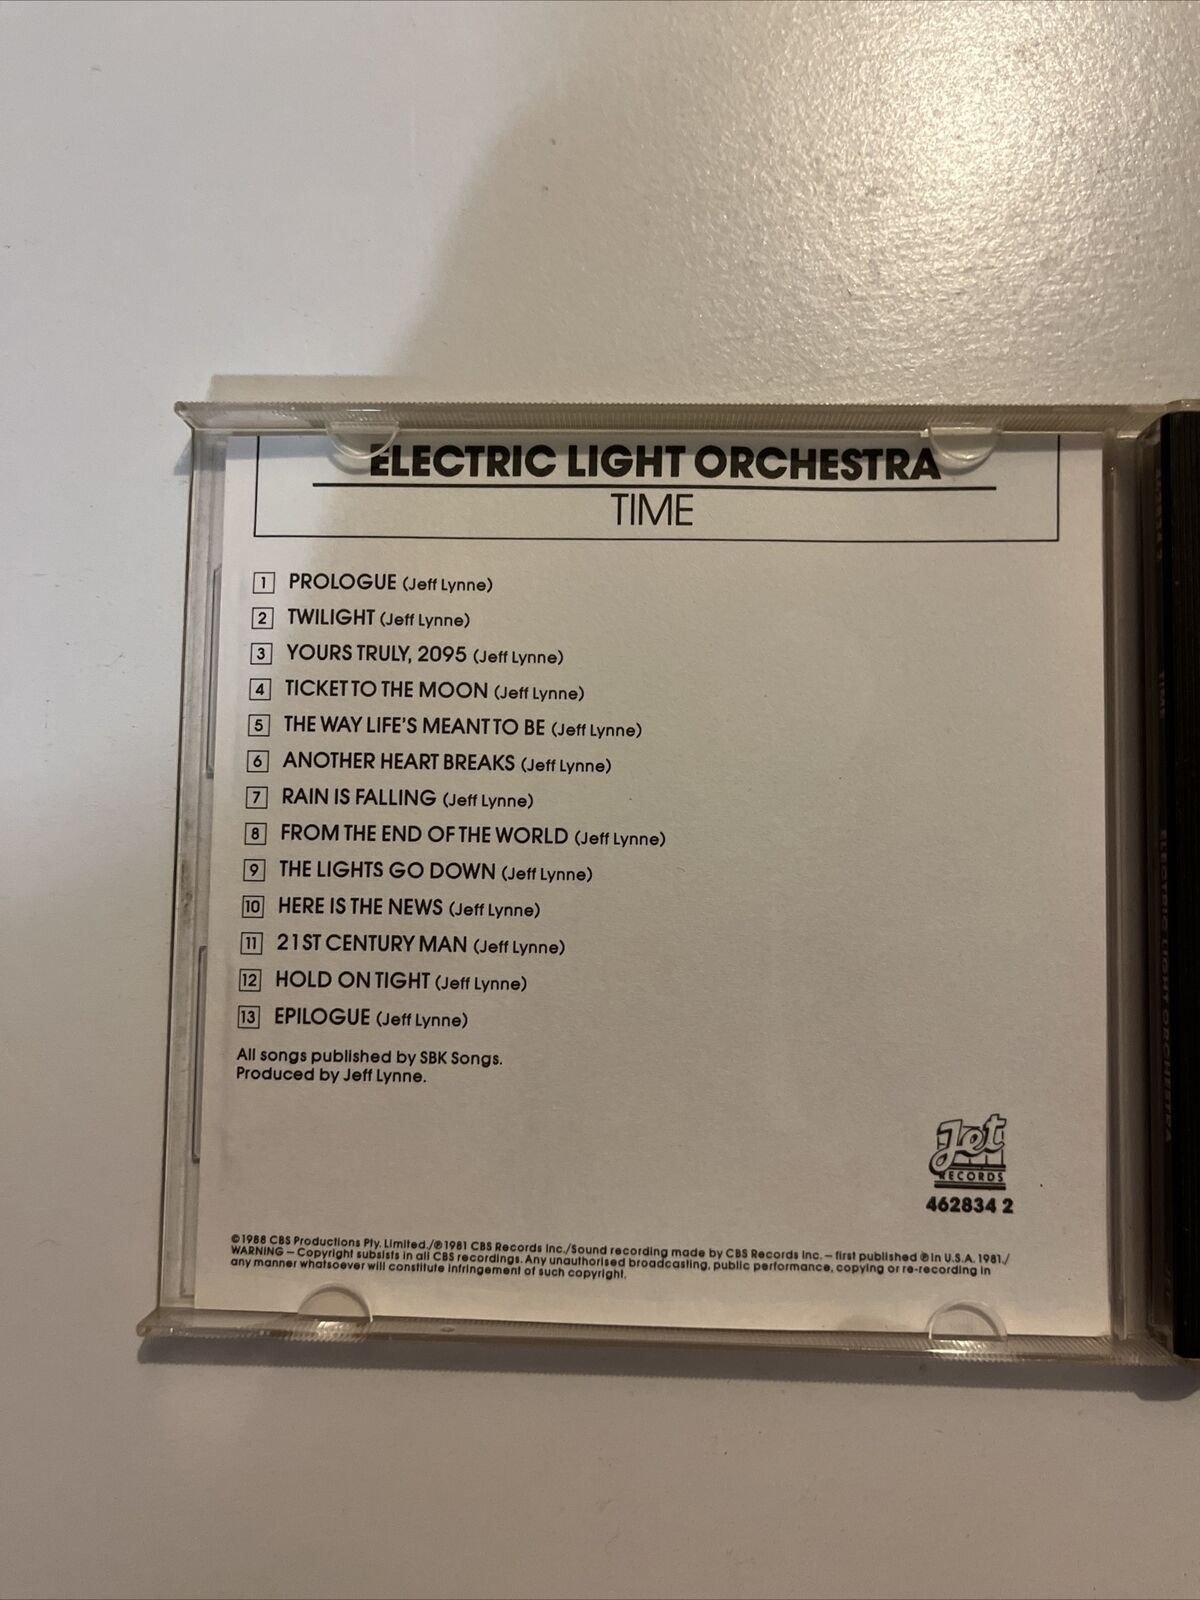 Electric Light Orchestra - Time (CD, 1981)